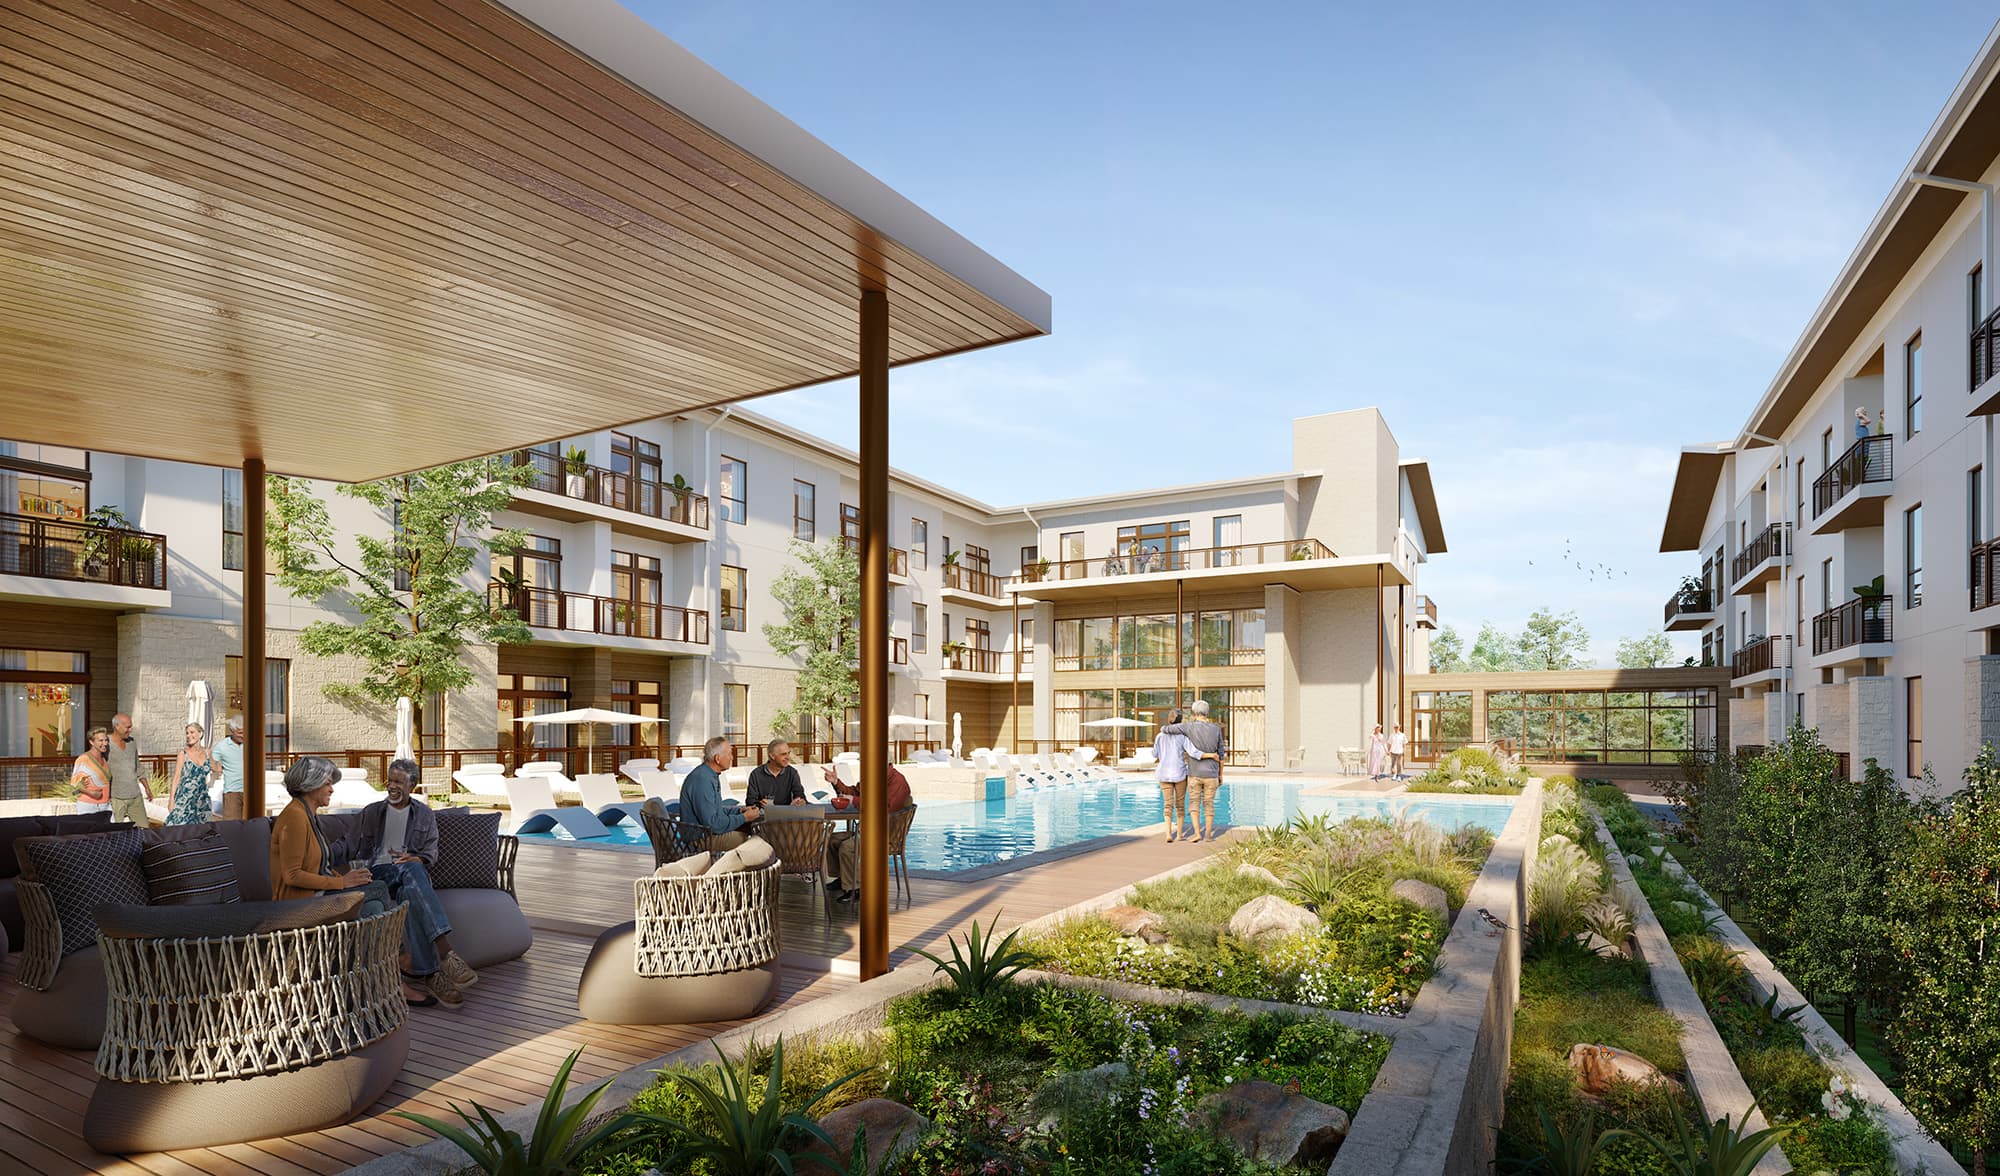 Austin Luxury Apartments - Jovie Belterra - Resort-Style Pool and Outdoor Seating with Greenery and View of Building Exterior